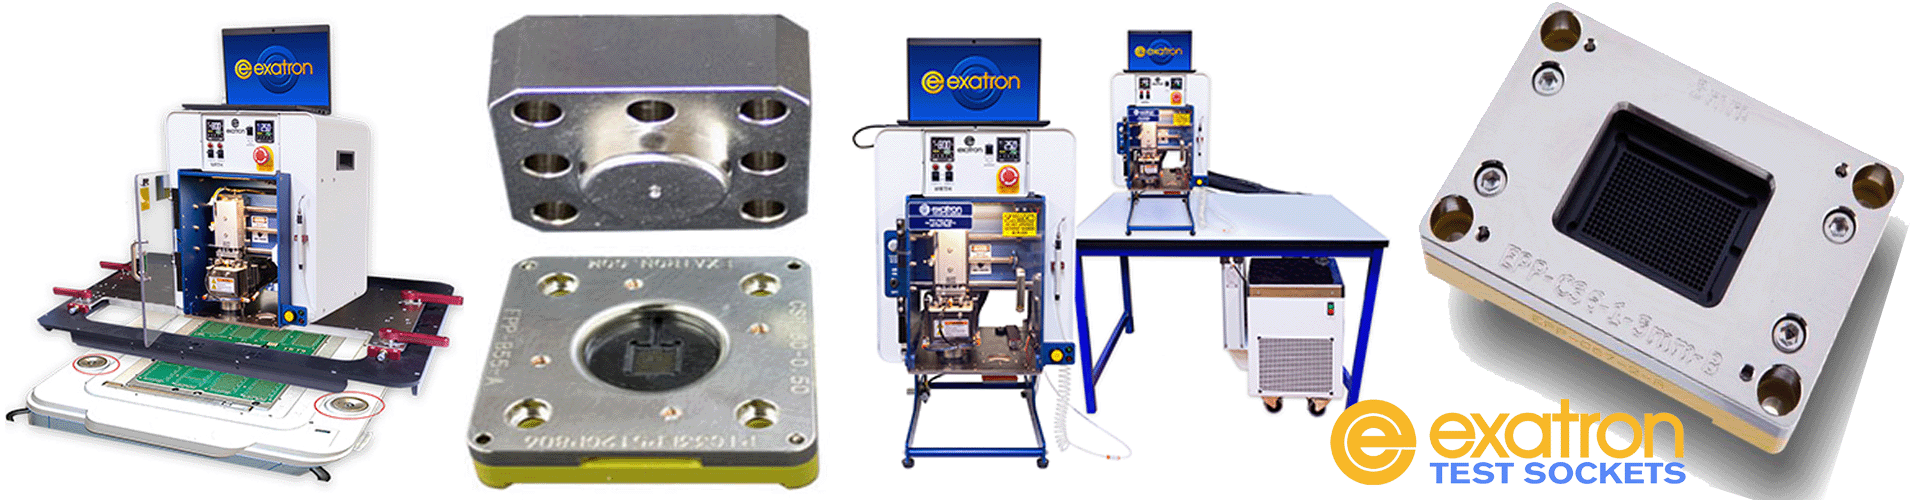 Exatron Thermal Test System, Direct Conduction not thermal forcing thermal stream